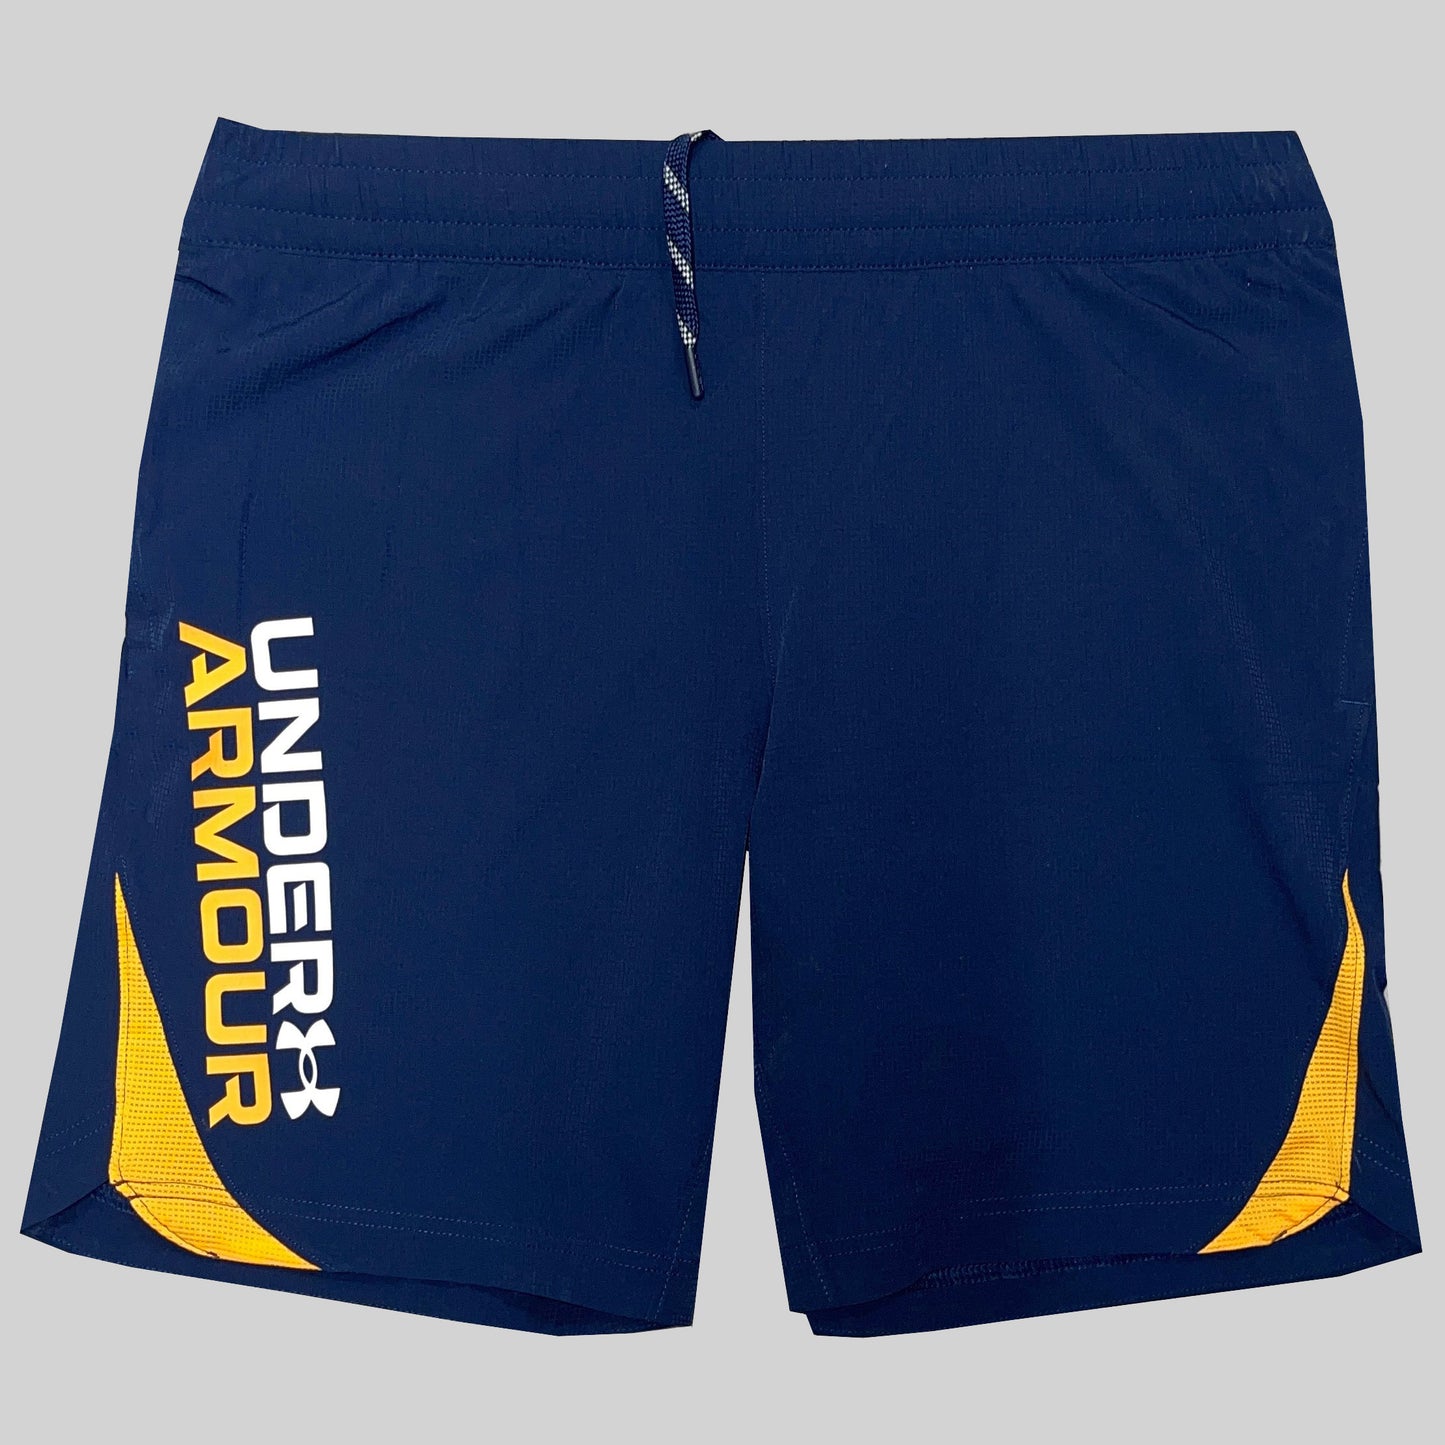 Under Armour Elevated Graphic Shorts